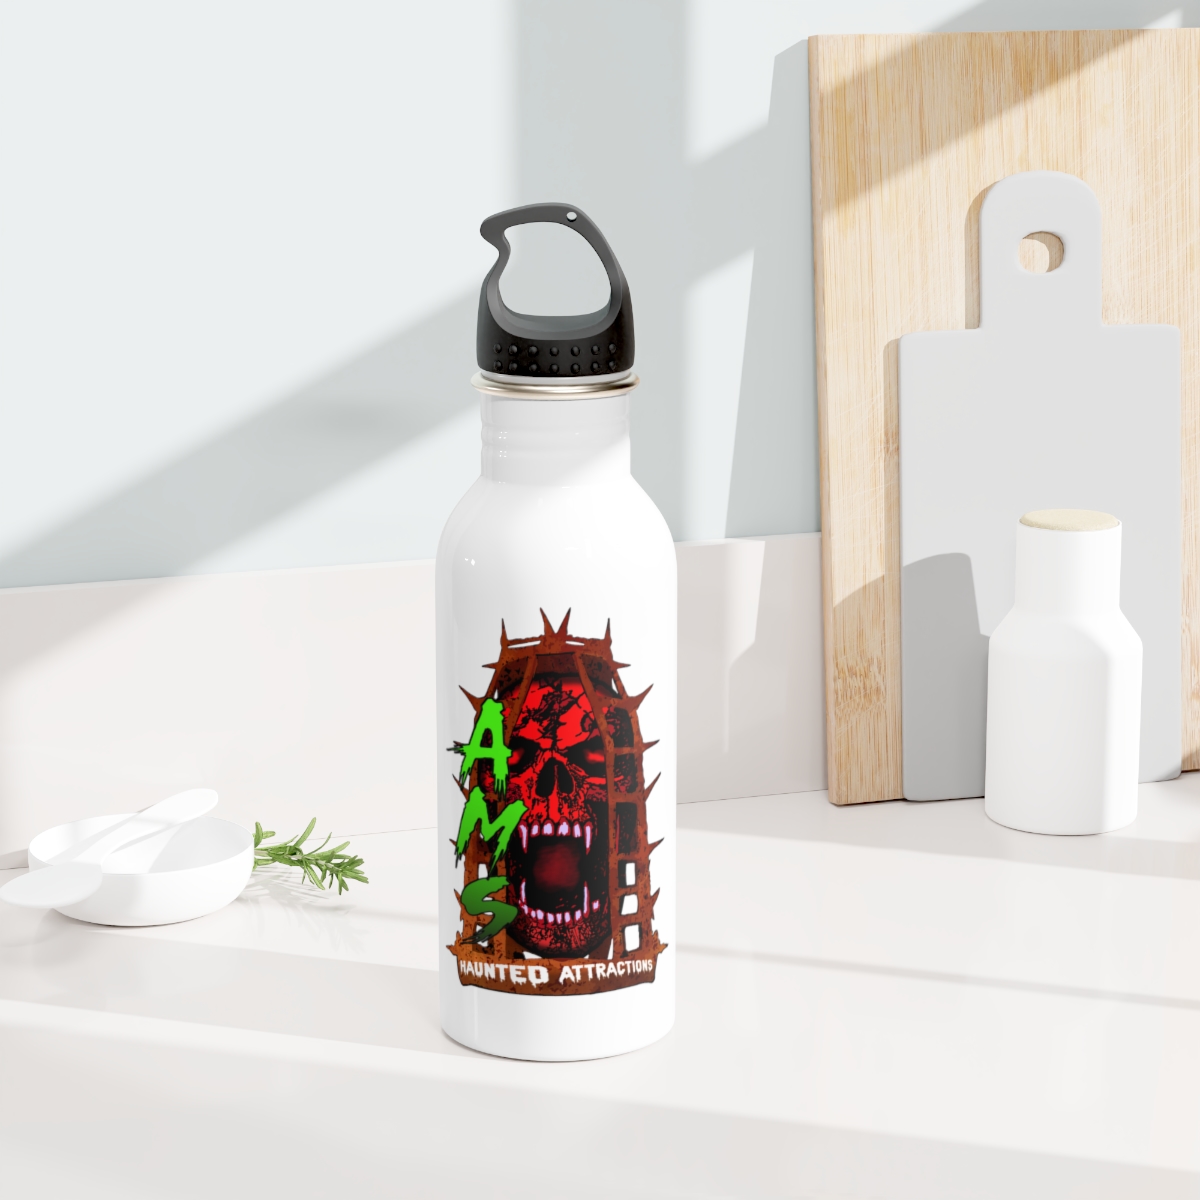 Stainless Steel Water Bottle product thumbnail image